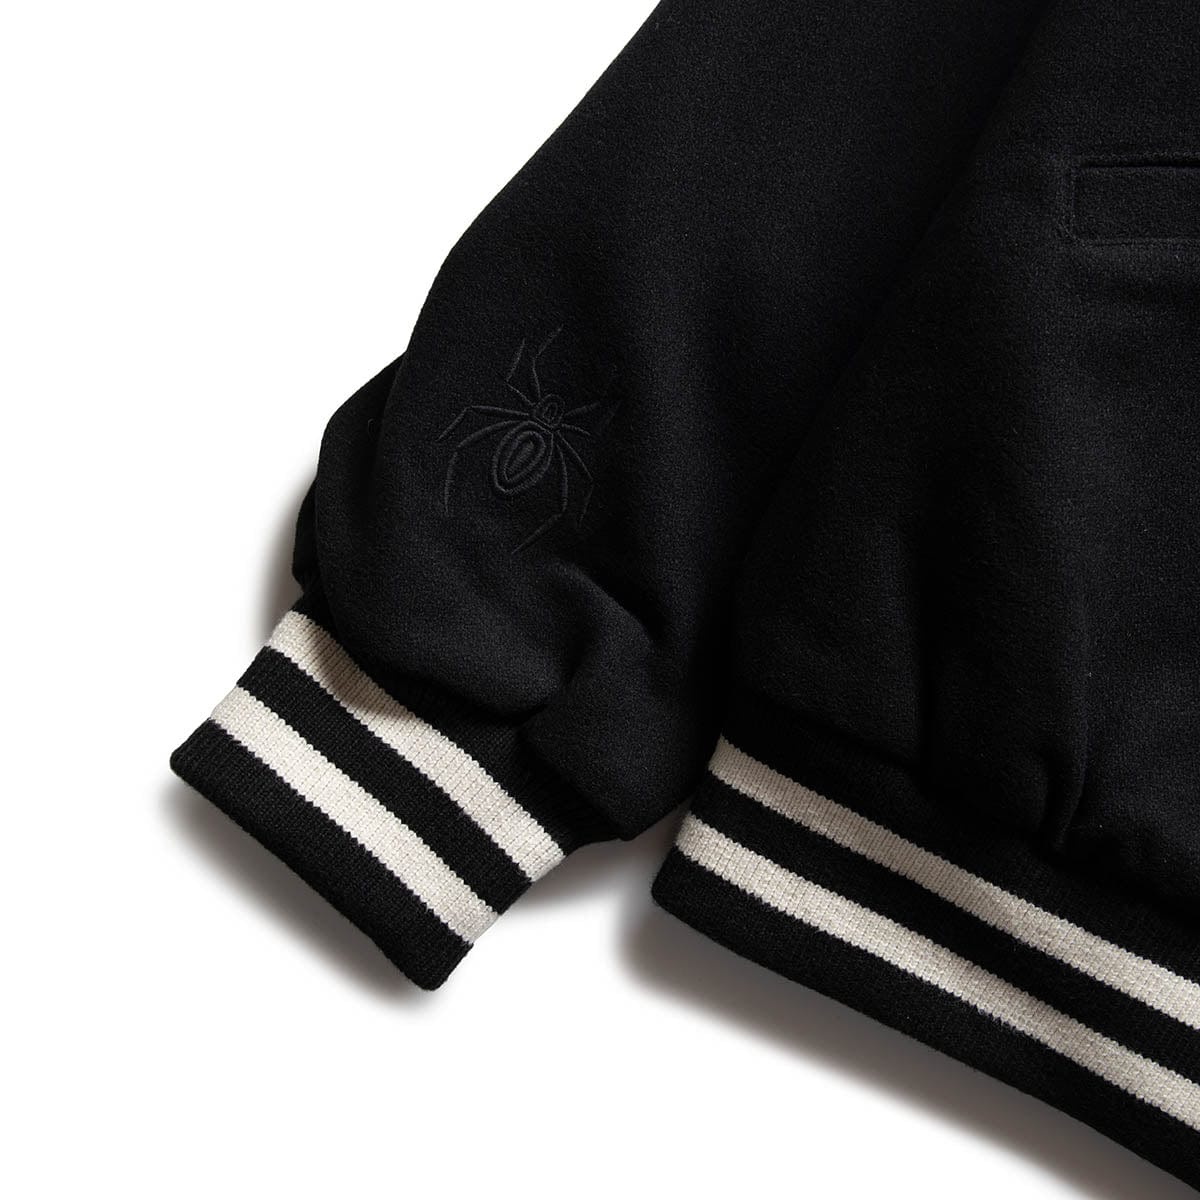 By Parra Outerwear CLOUDY STAR VARSITY JACKET